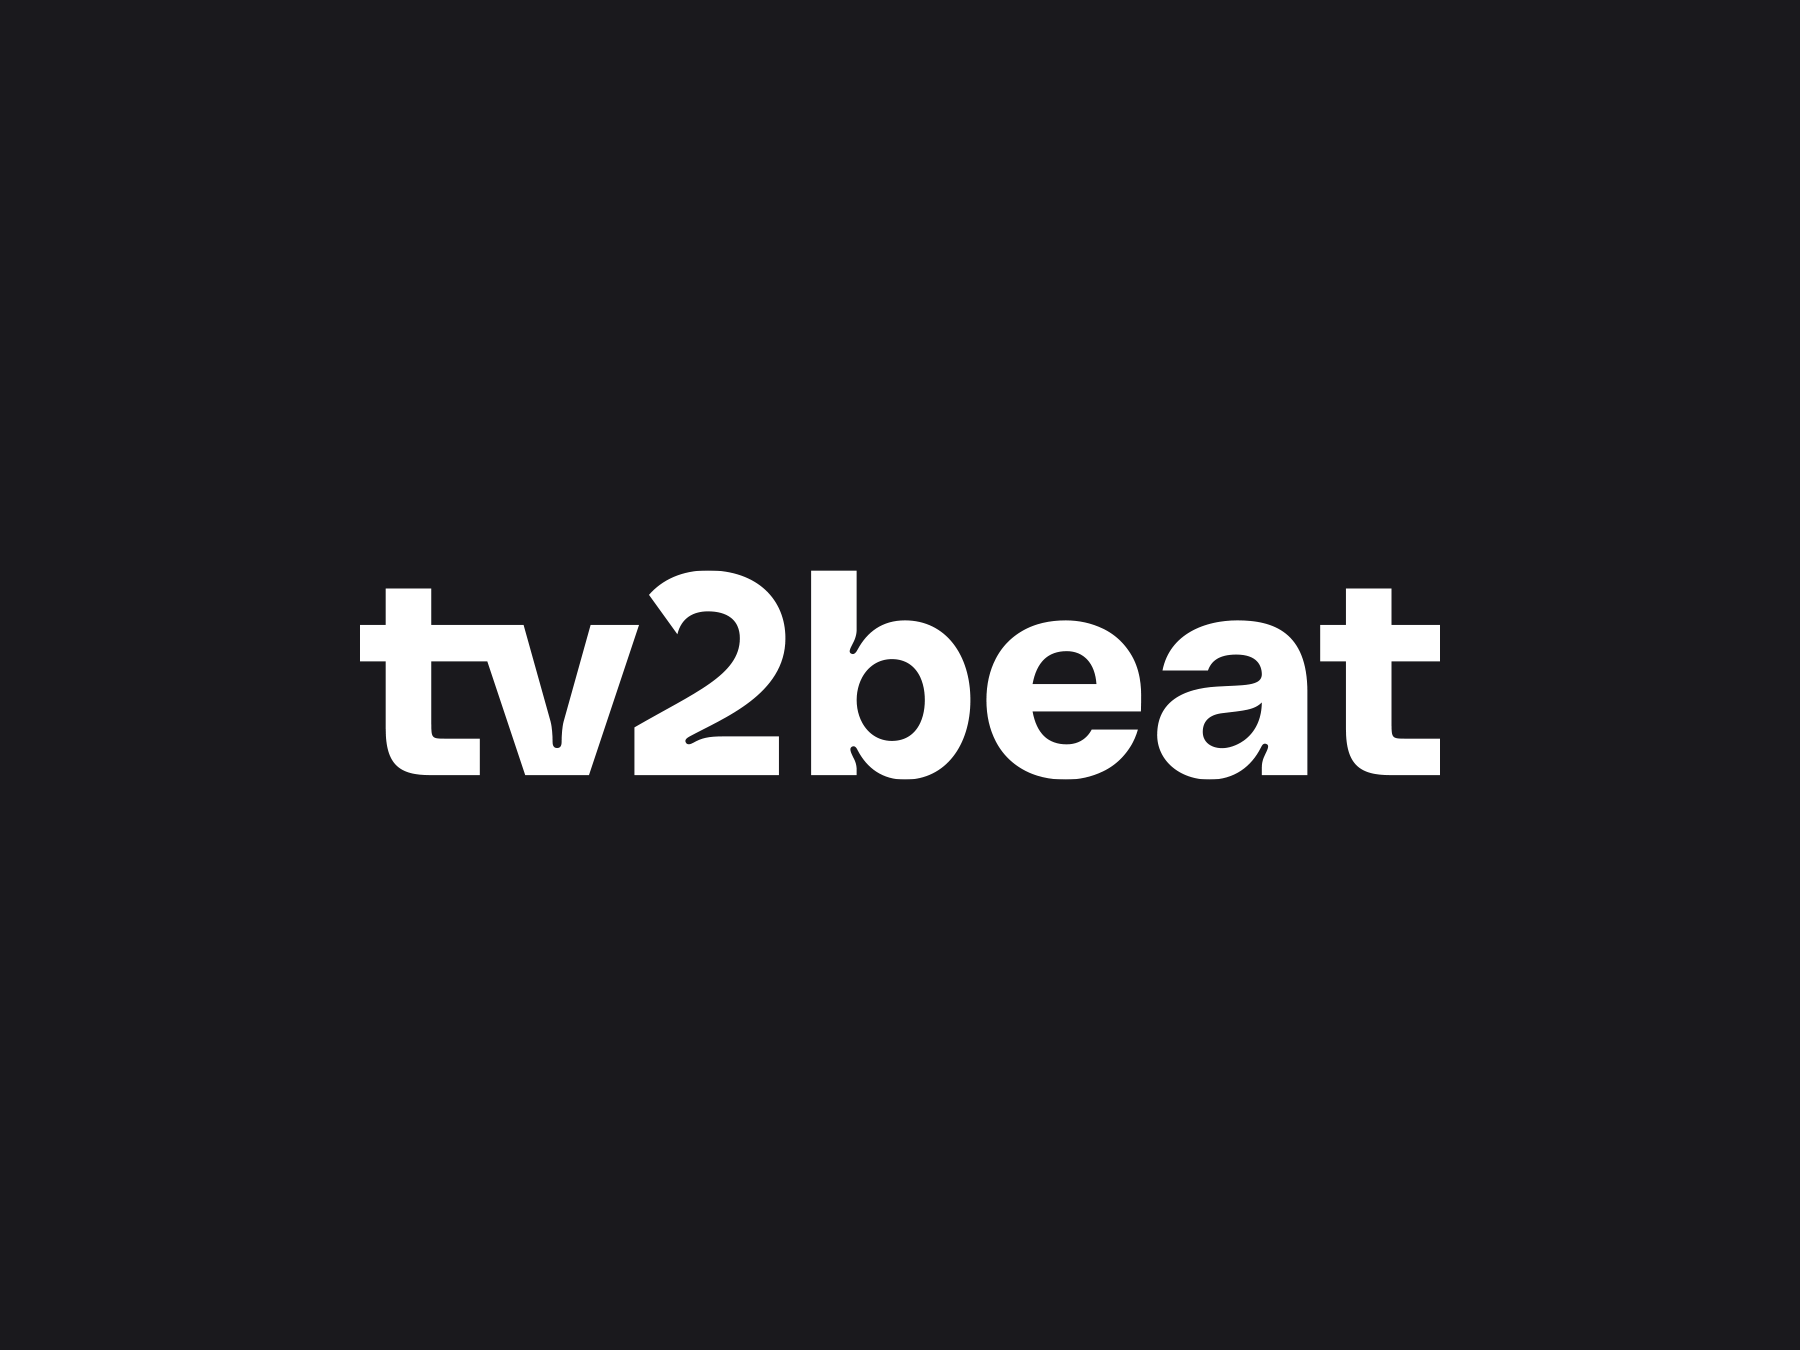 Audiovisual production for Afterlife – tv2beat